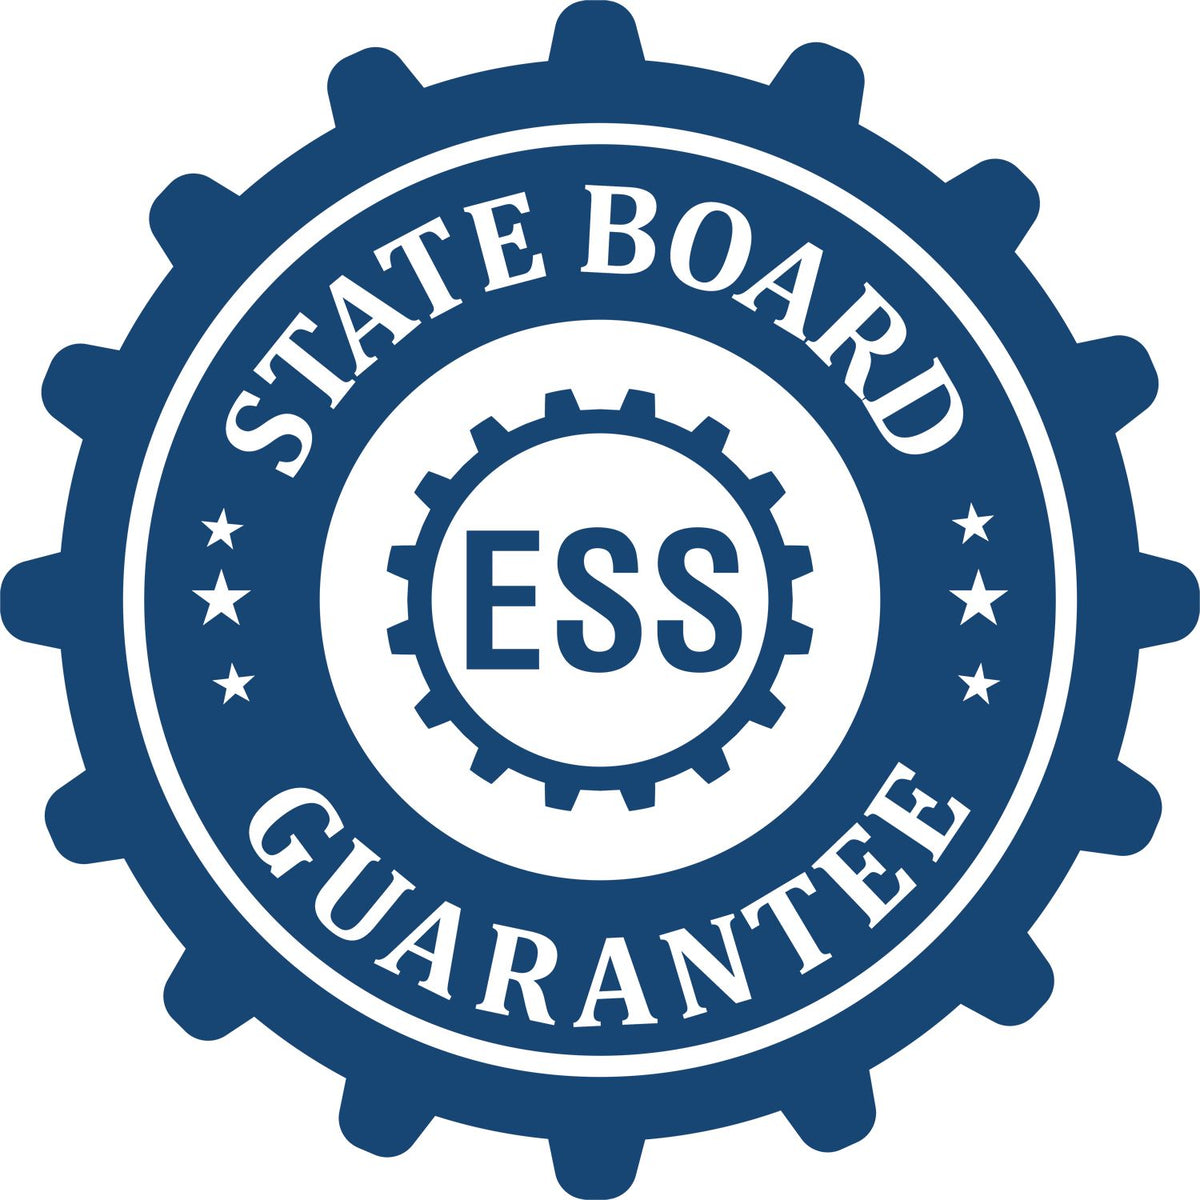 An emblem in a gear shape illustrating a state board guarantee for the Hybrid New Hampshire Land Surveyor Seal